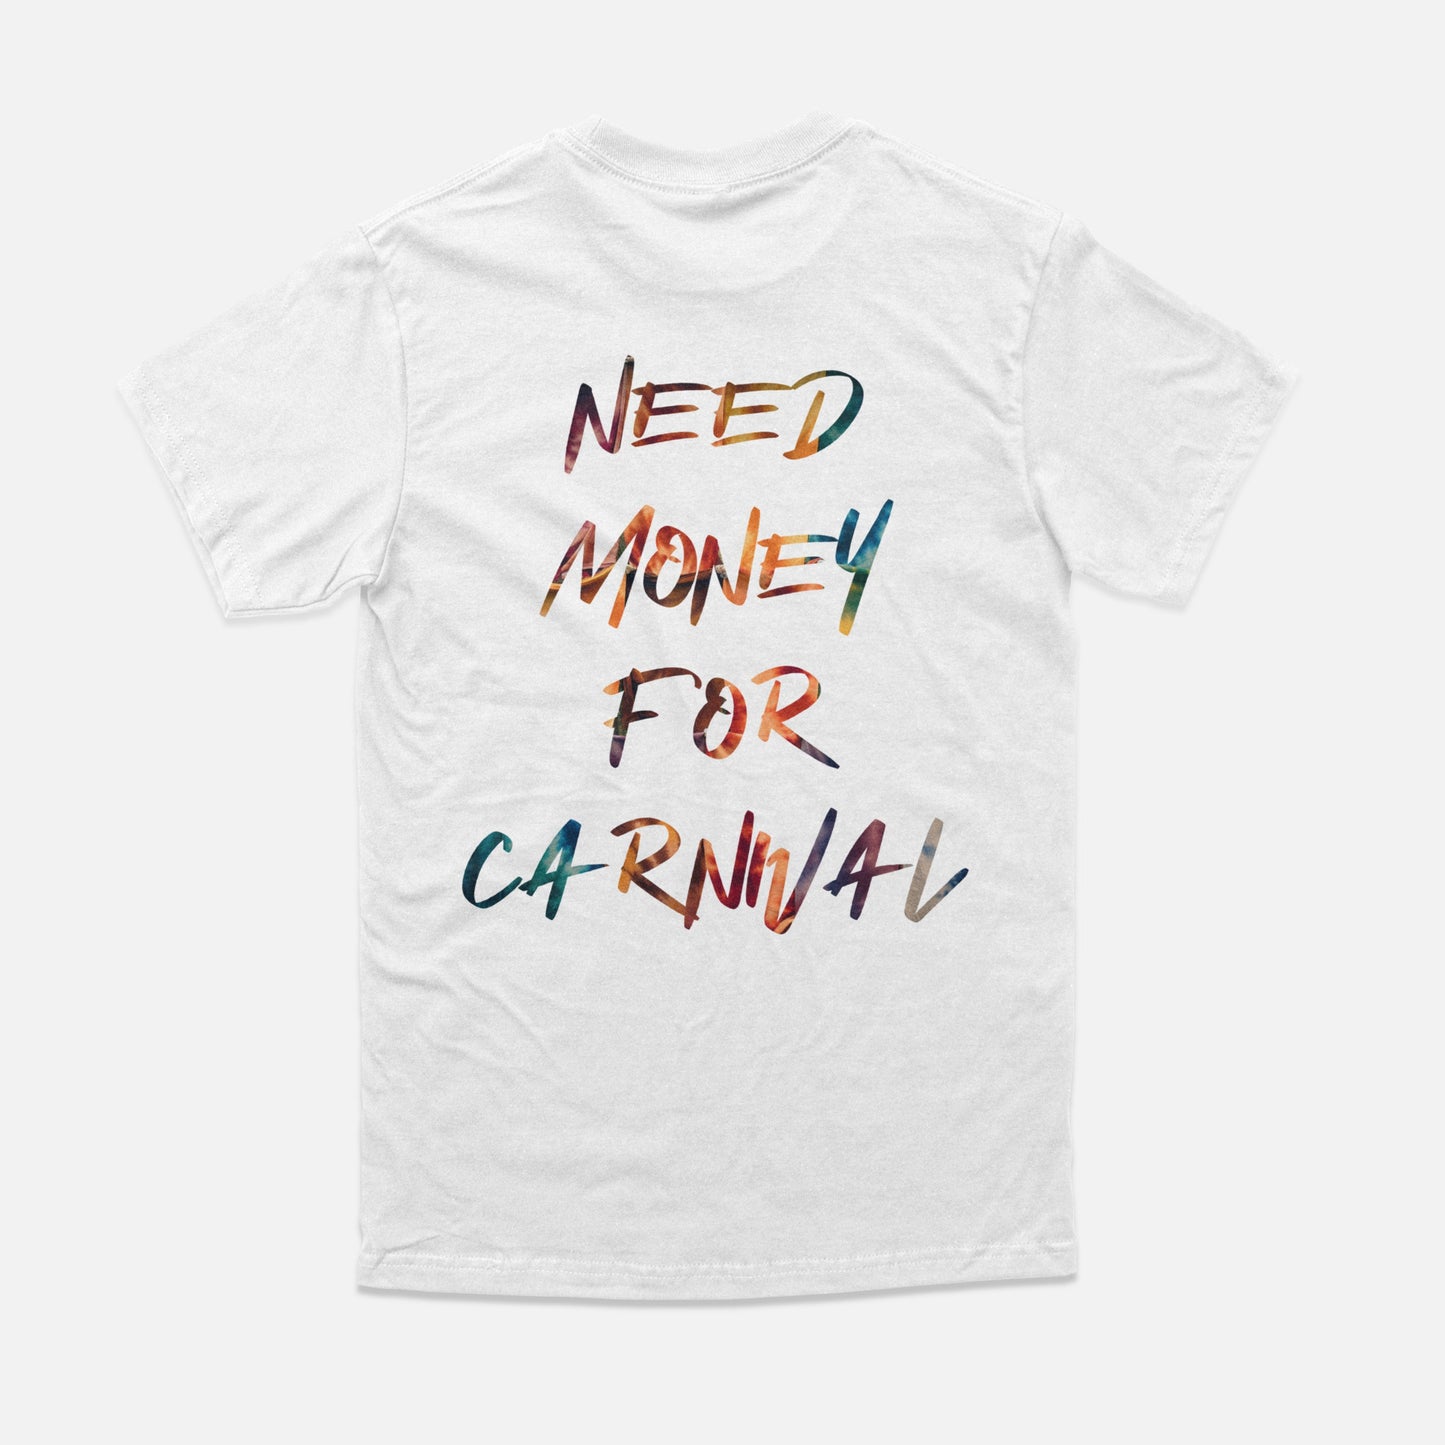 One Caribbean "Need Money For Carnival" Tie-Dye White Tee